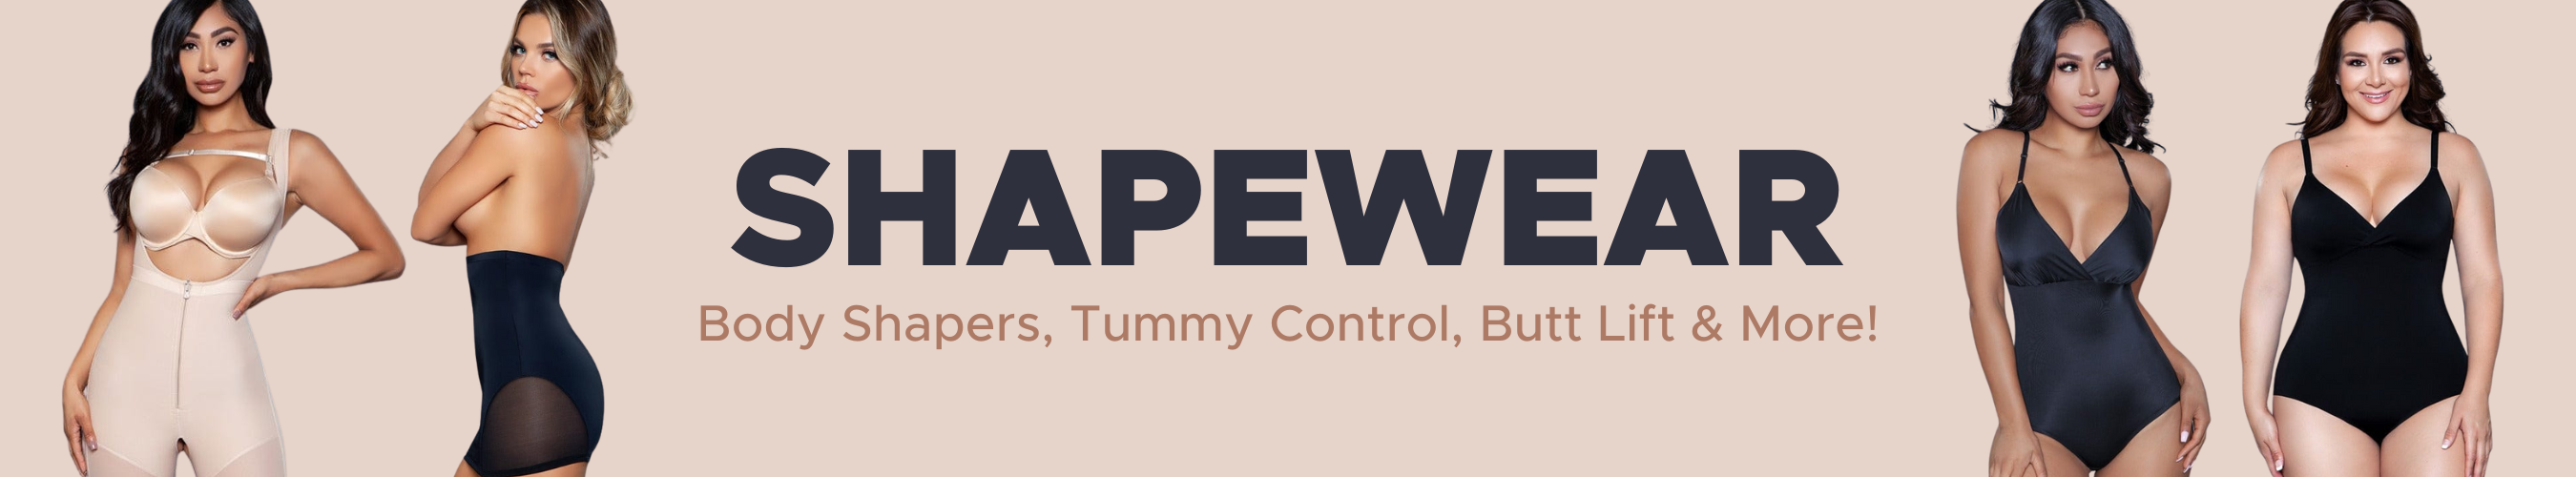 Browse our shapewear selection! Includes body shapers, tummy control, butt lift, and more!